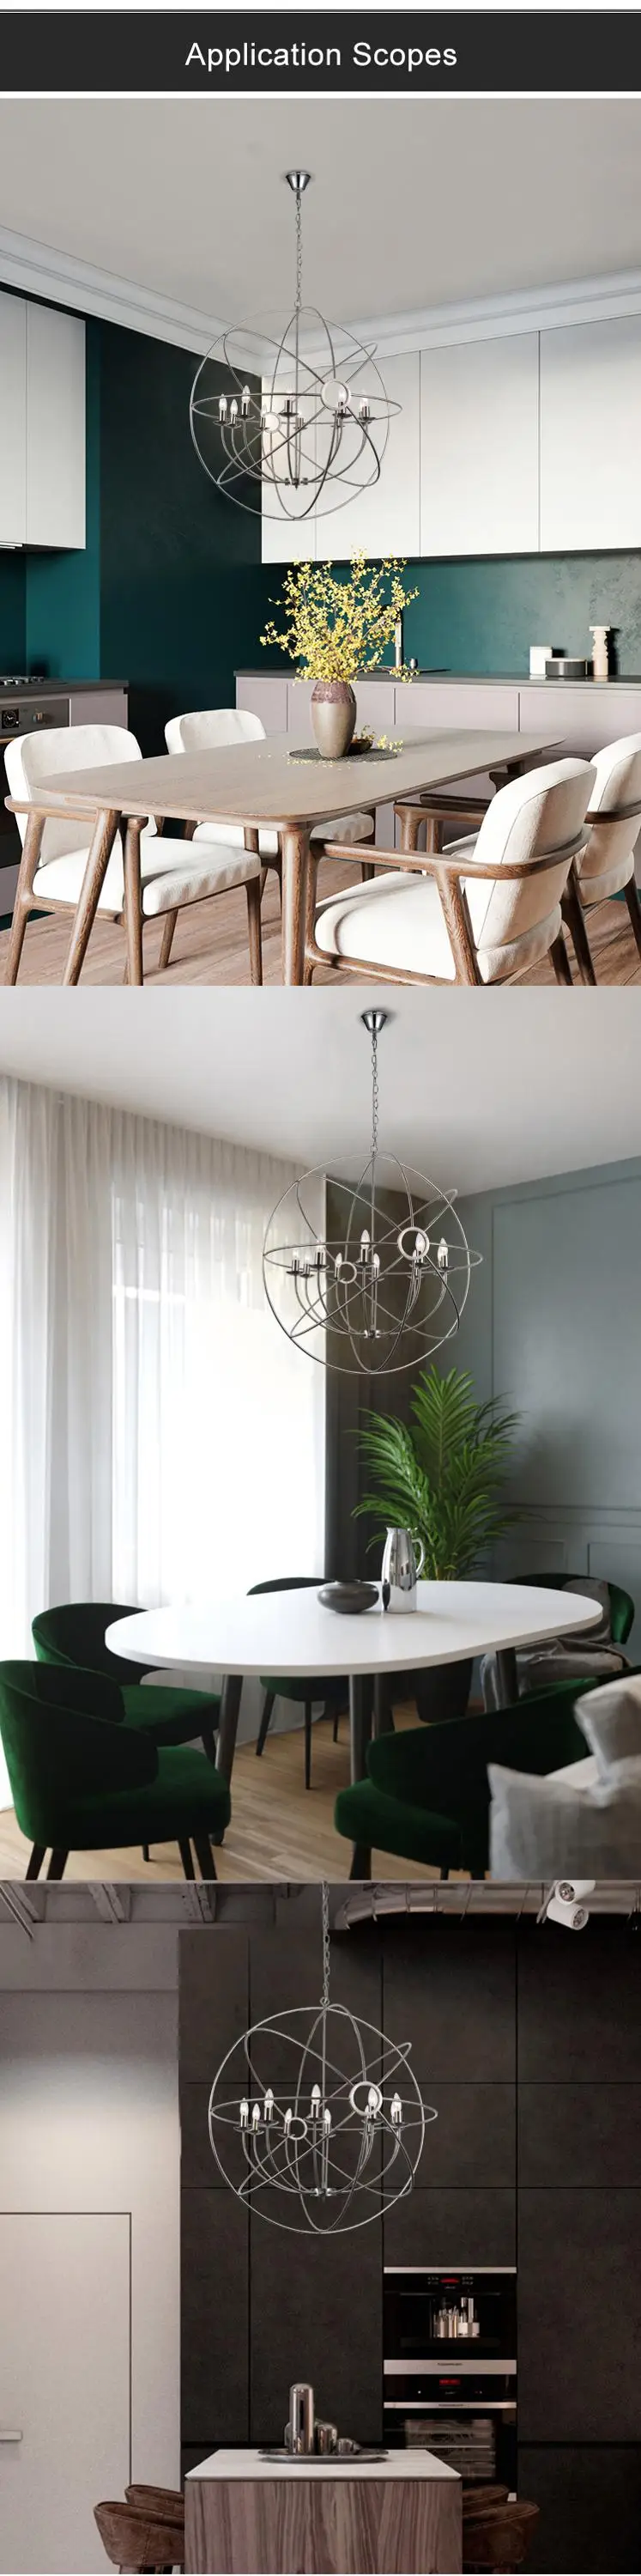 2019 hot sell vintage iron type design chandeliers pendant lamp